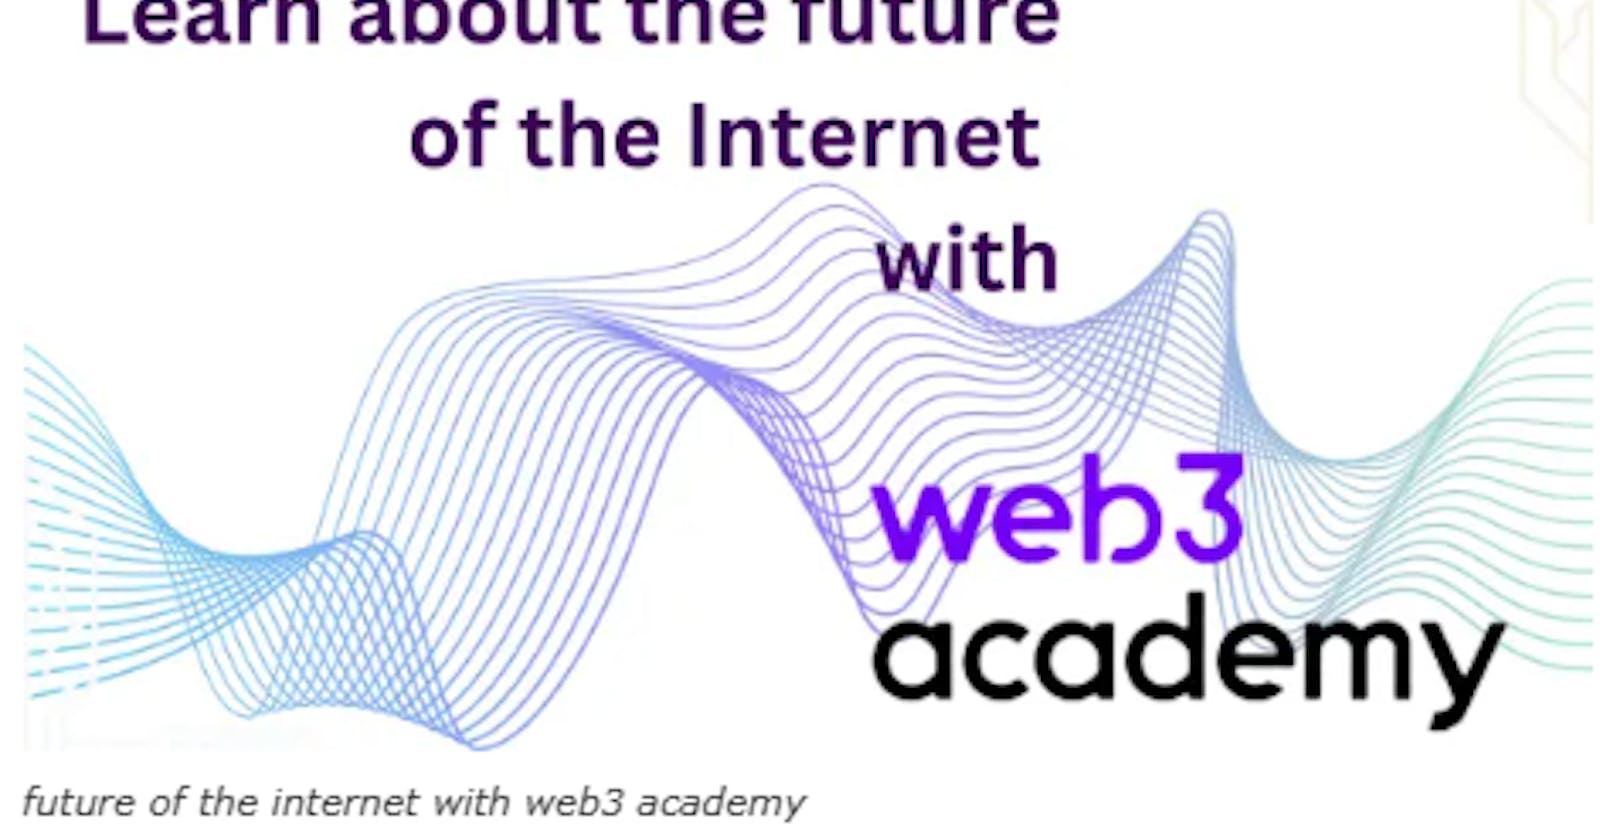 Web3 Academy: Learn about the future of the Internet